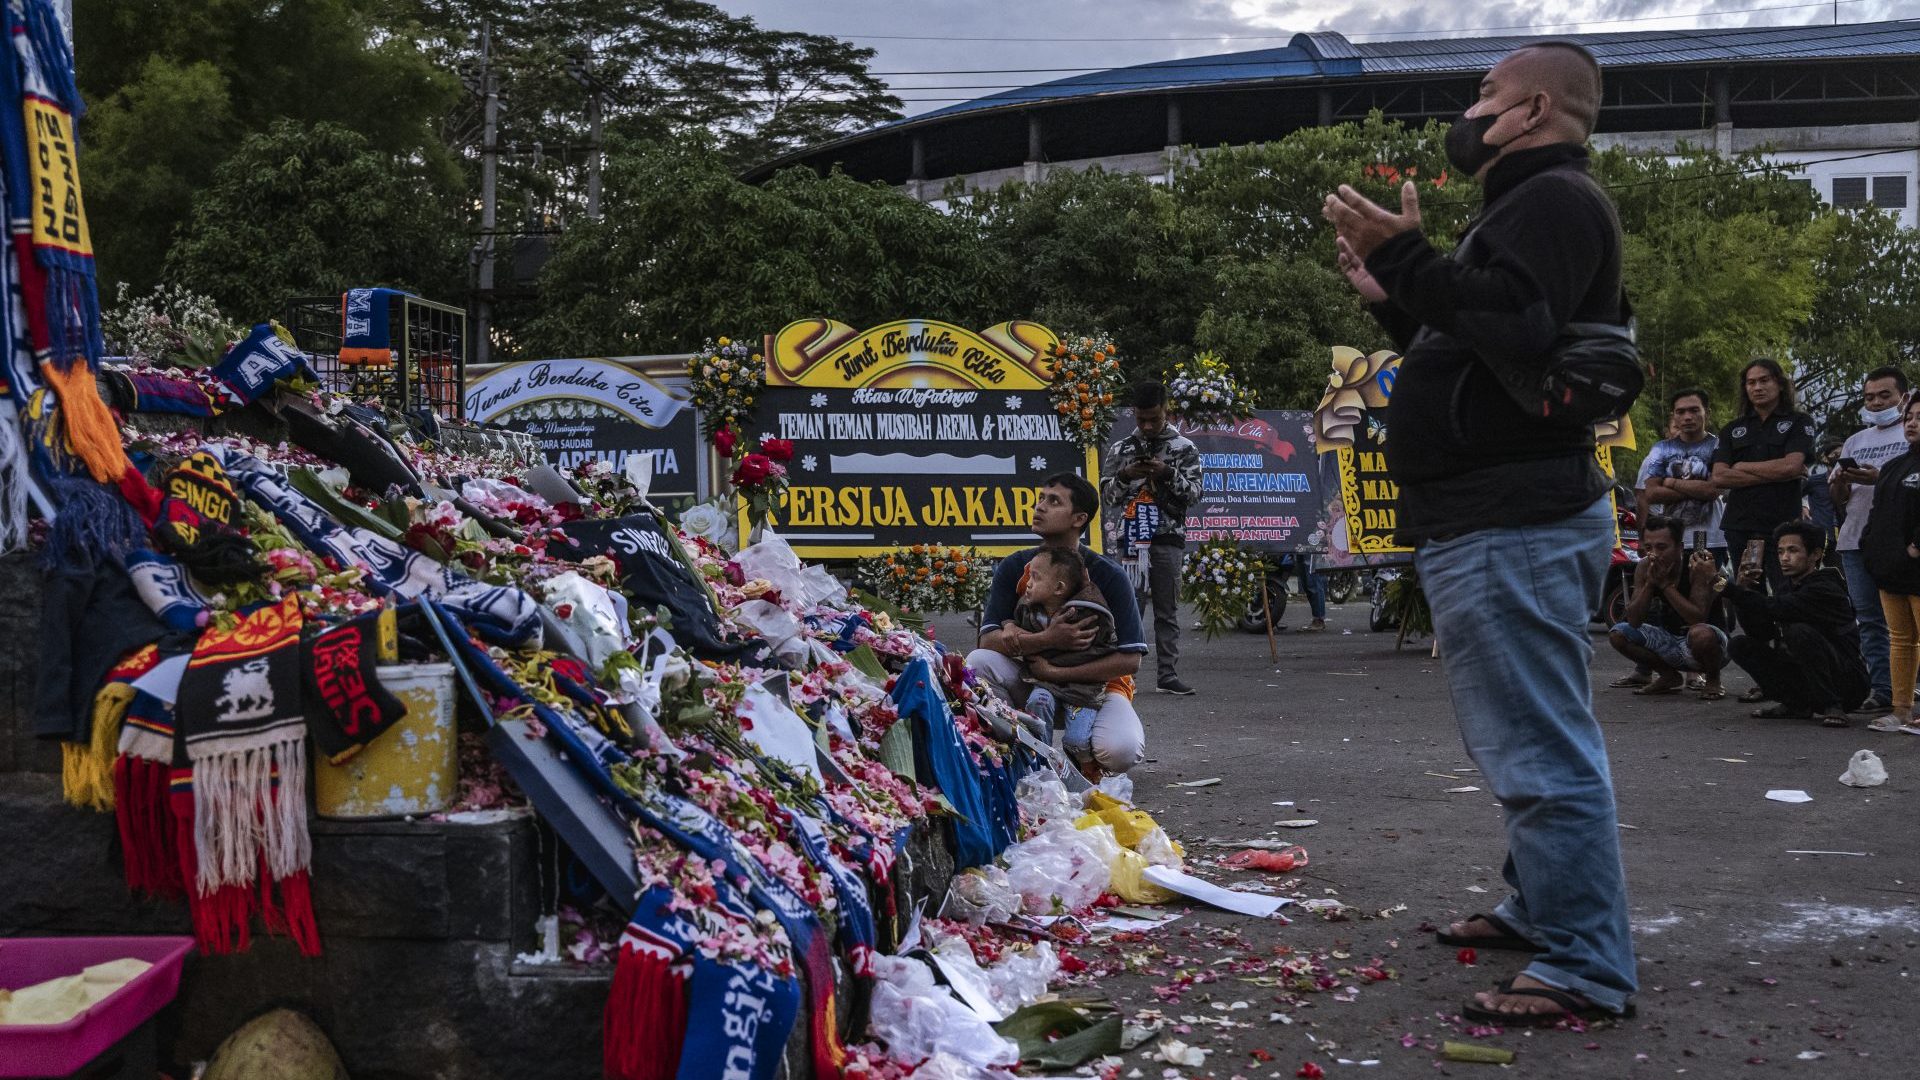 Mourners pay tribute to the victims of last weekend’s Kanjuruhan Stadium disaster in Malang, Indonesia. Photo: Ulet Ifansasti/Getty